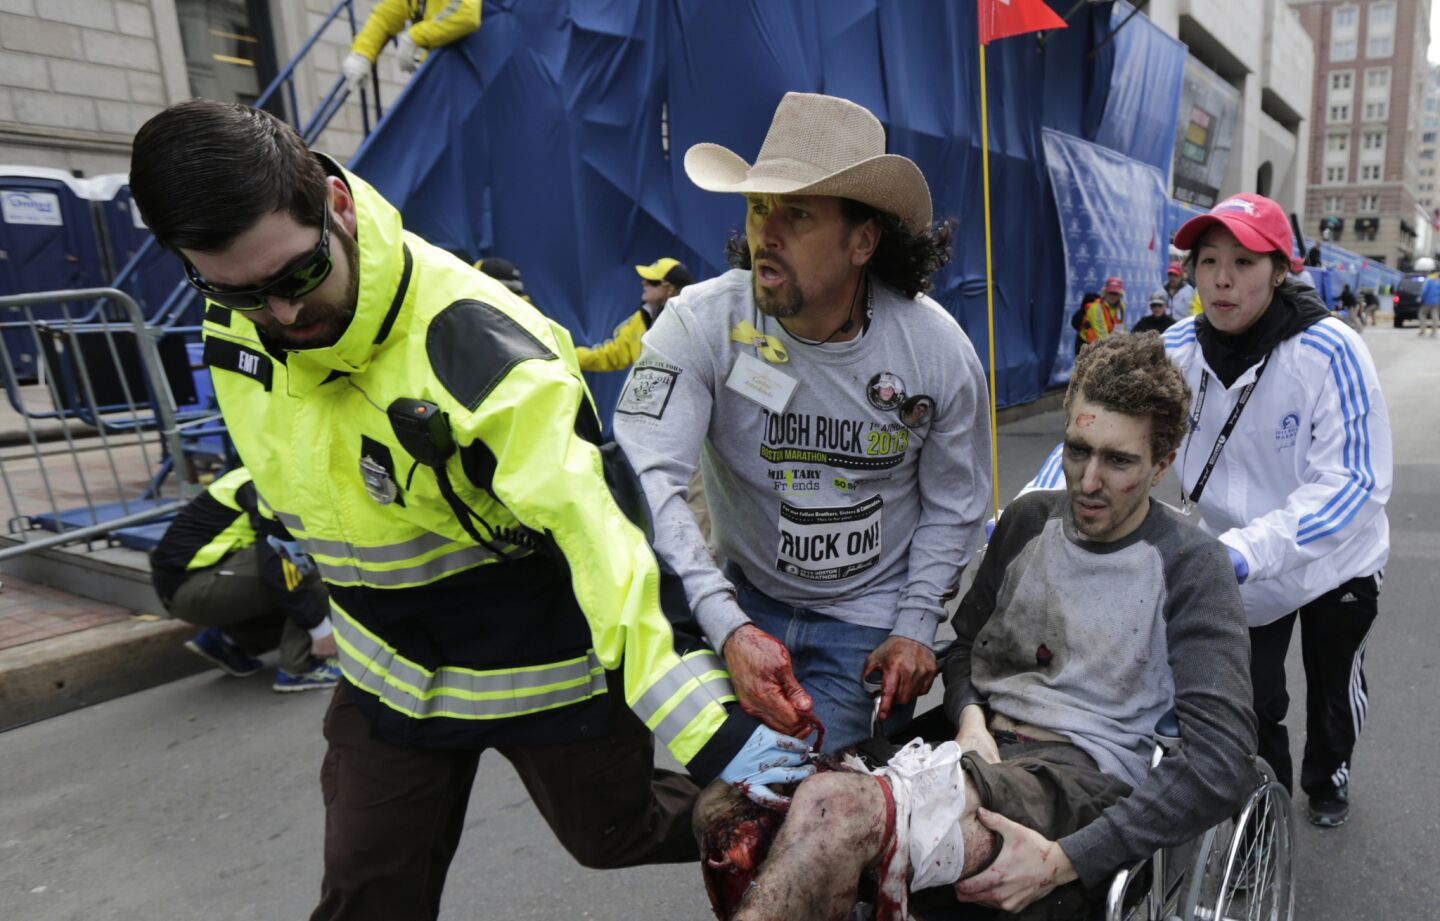 Emergency responders and volunteers push Jeff Bauman in a wheel chair after he was injured in an explosion near the finish line of the Boston Marathon.